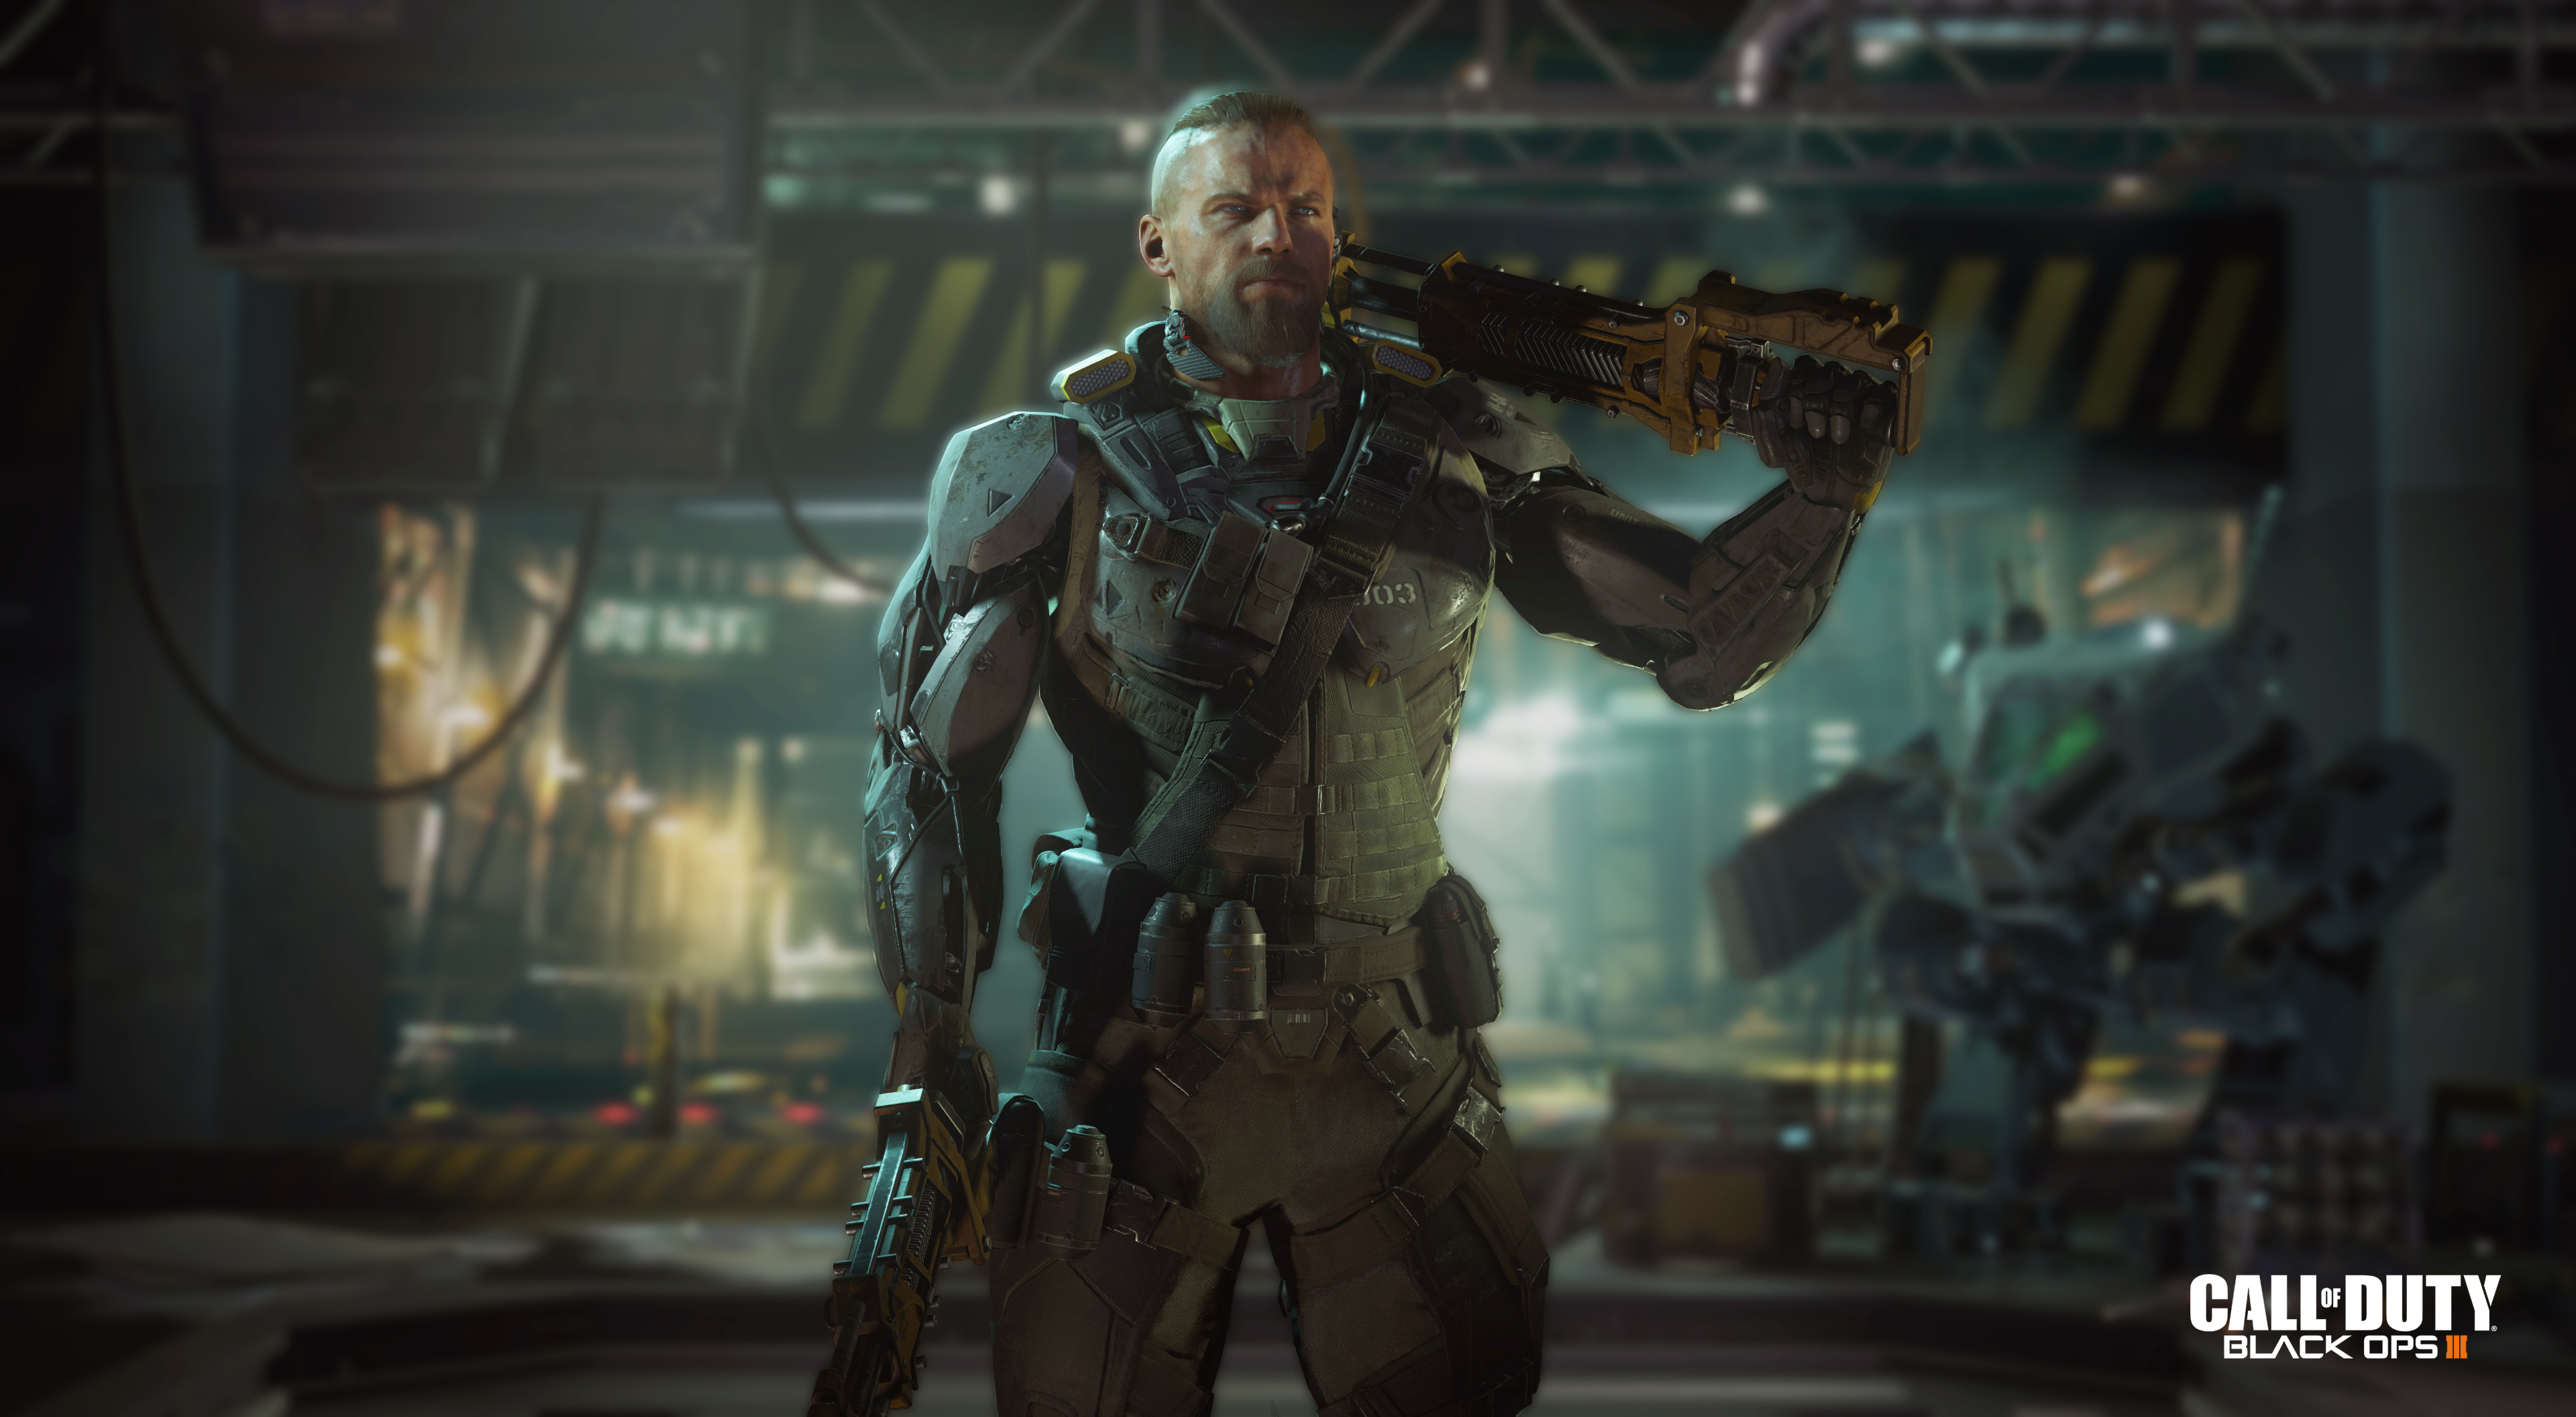 Call of Duty Black Ops 3 Wallpapers and Backgrounds